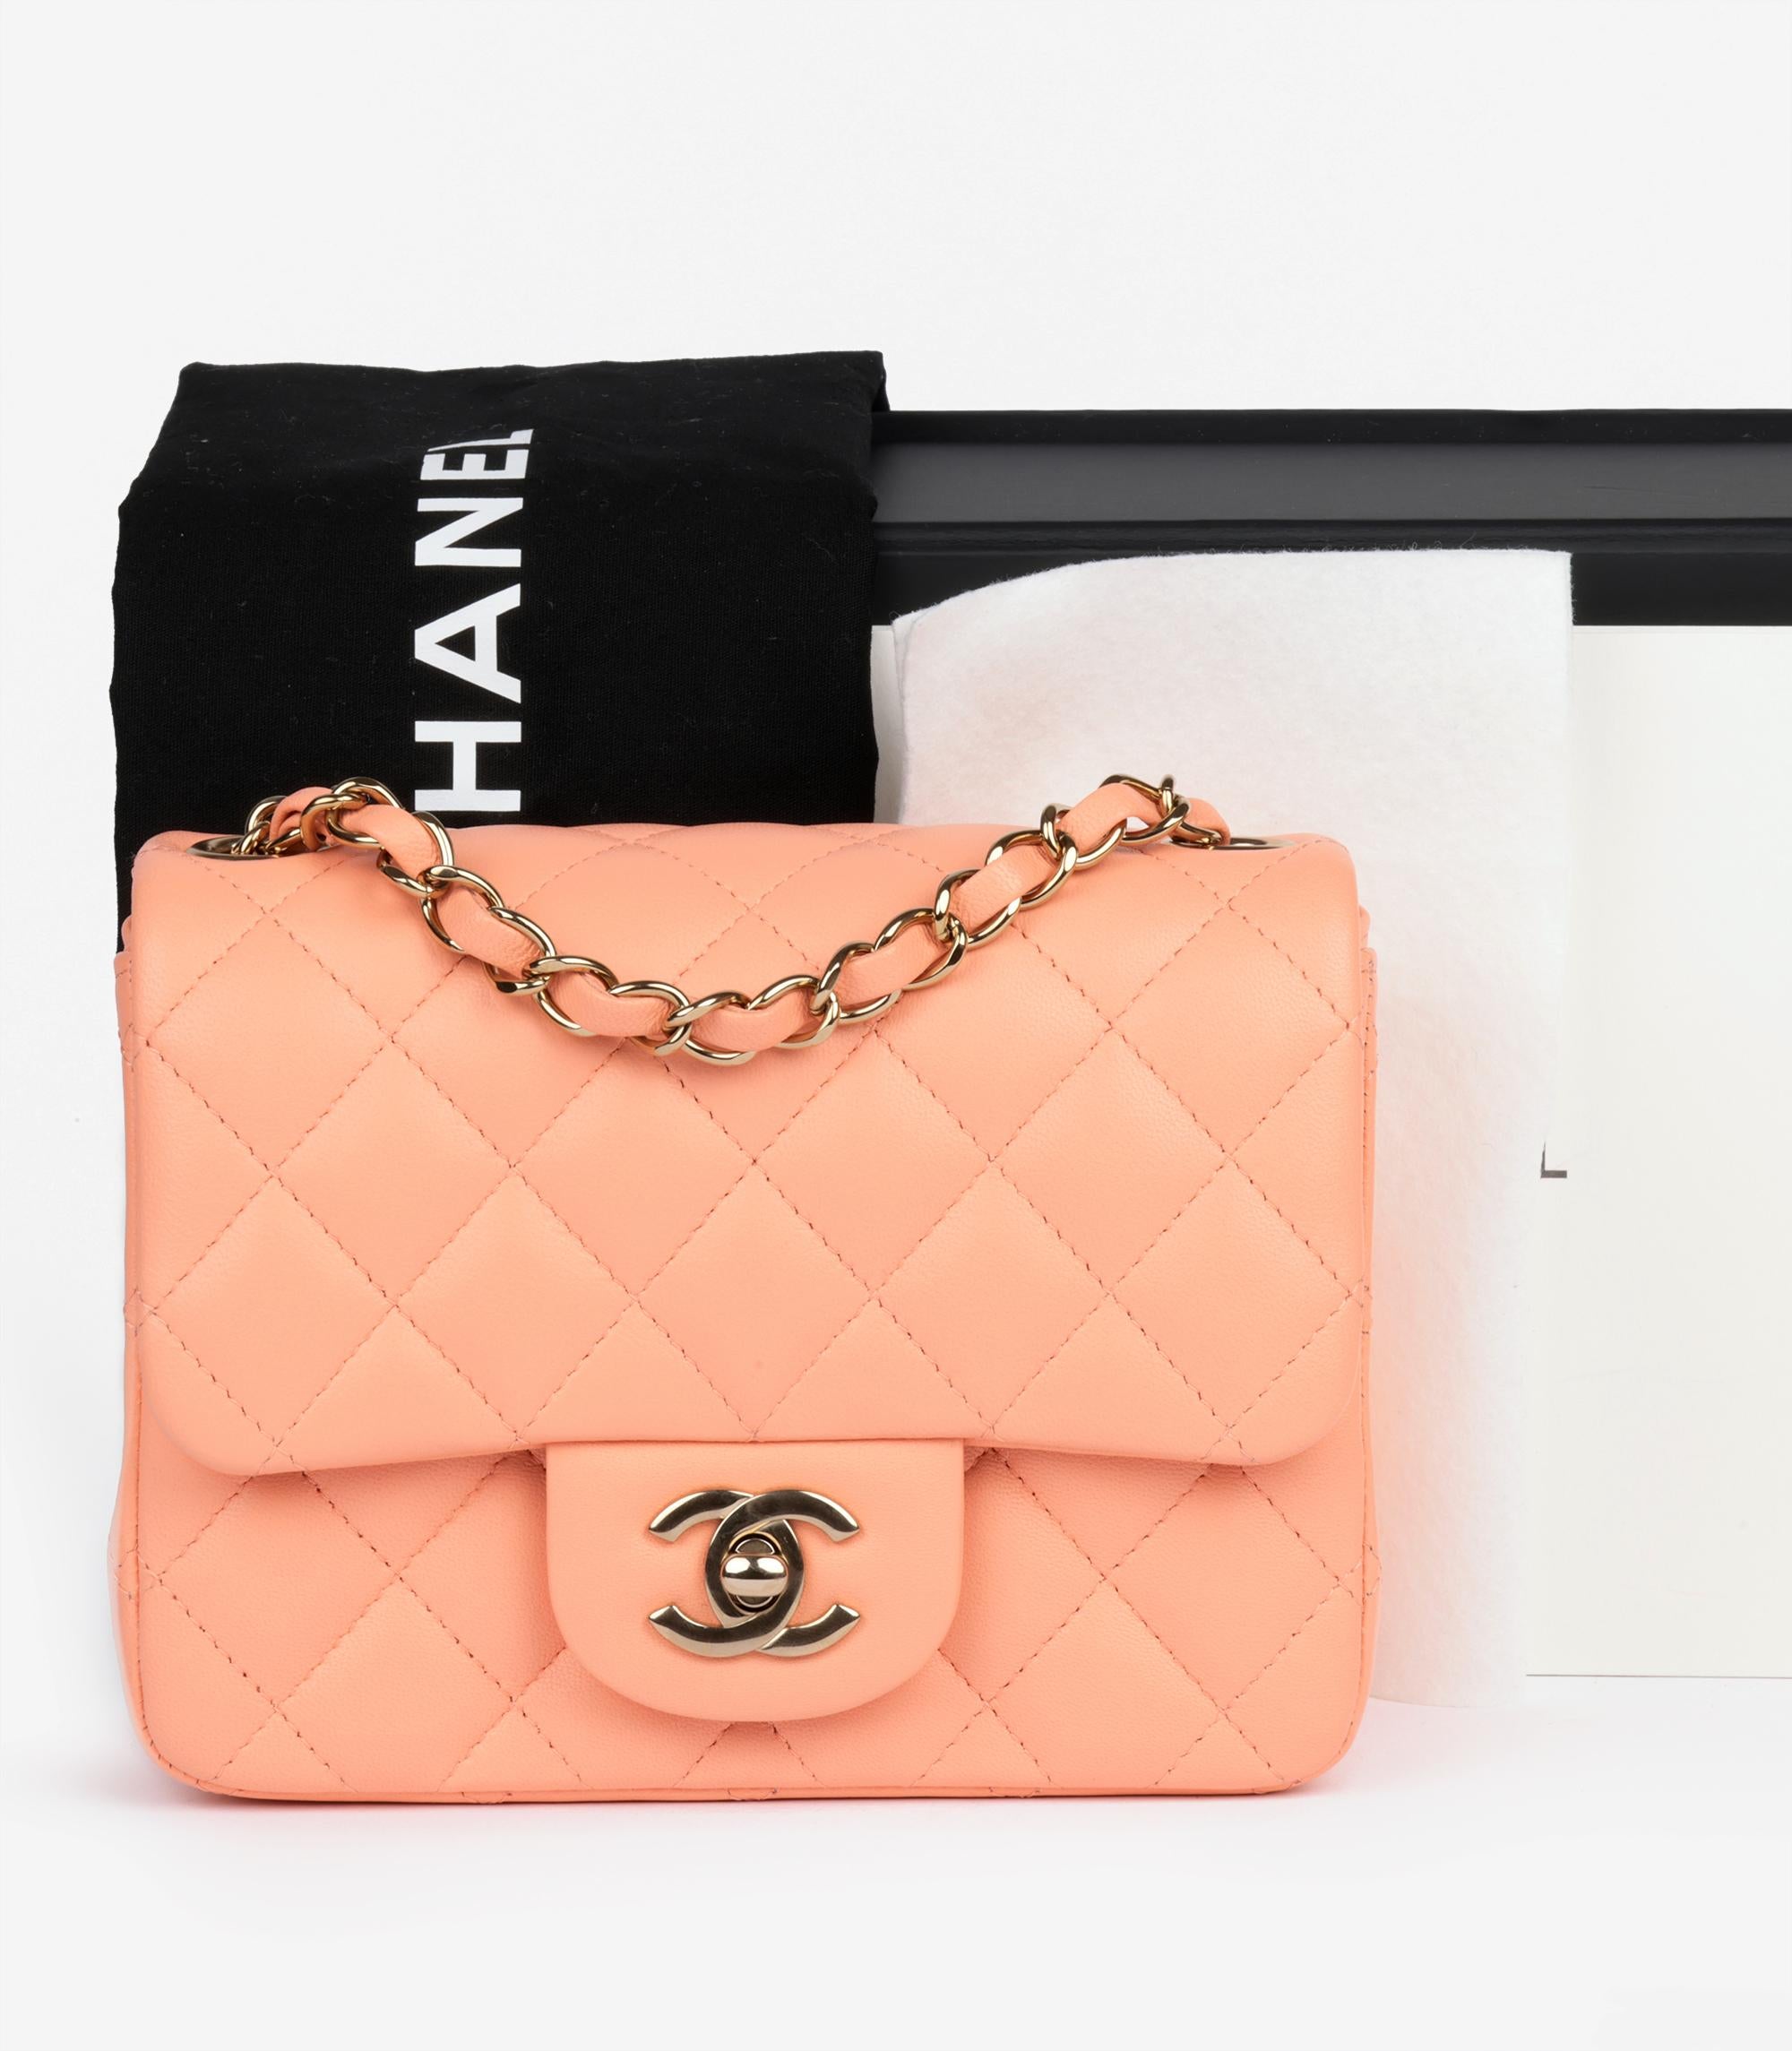 Chanel Salmon Peach Quilted Lambskin Square Mini Flap Bag For Sale 7